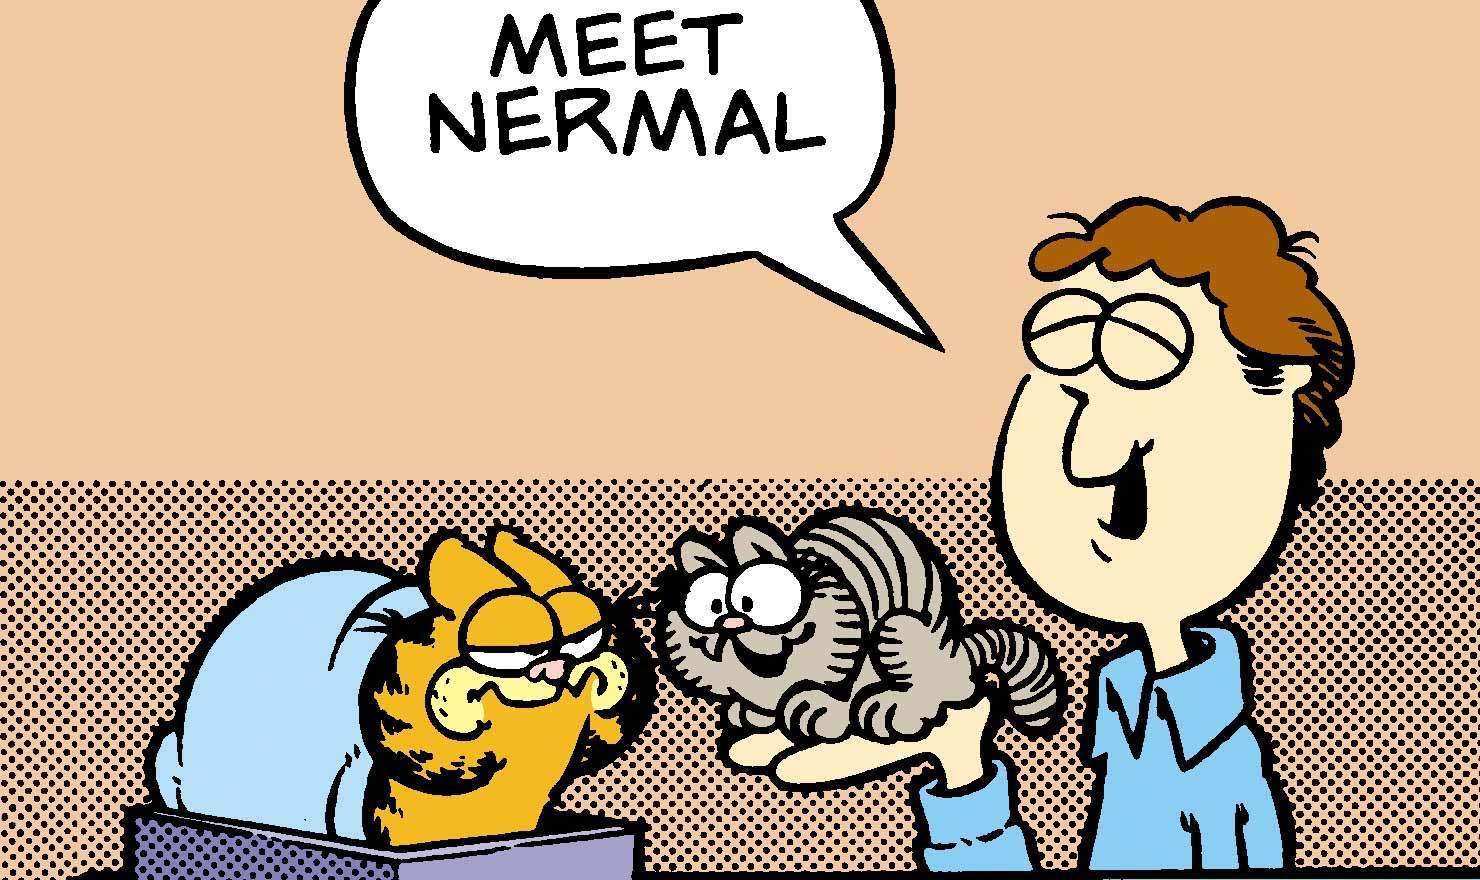 Cuteness Prevails! How Garfield Accepted the New Nermal